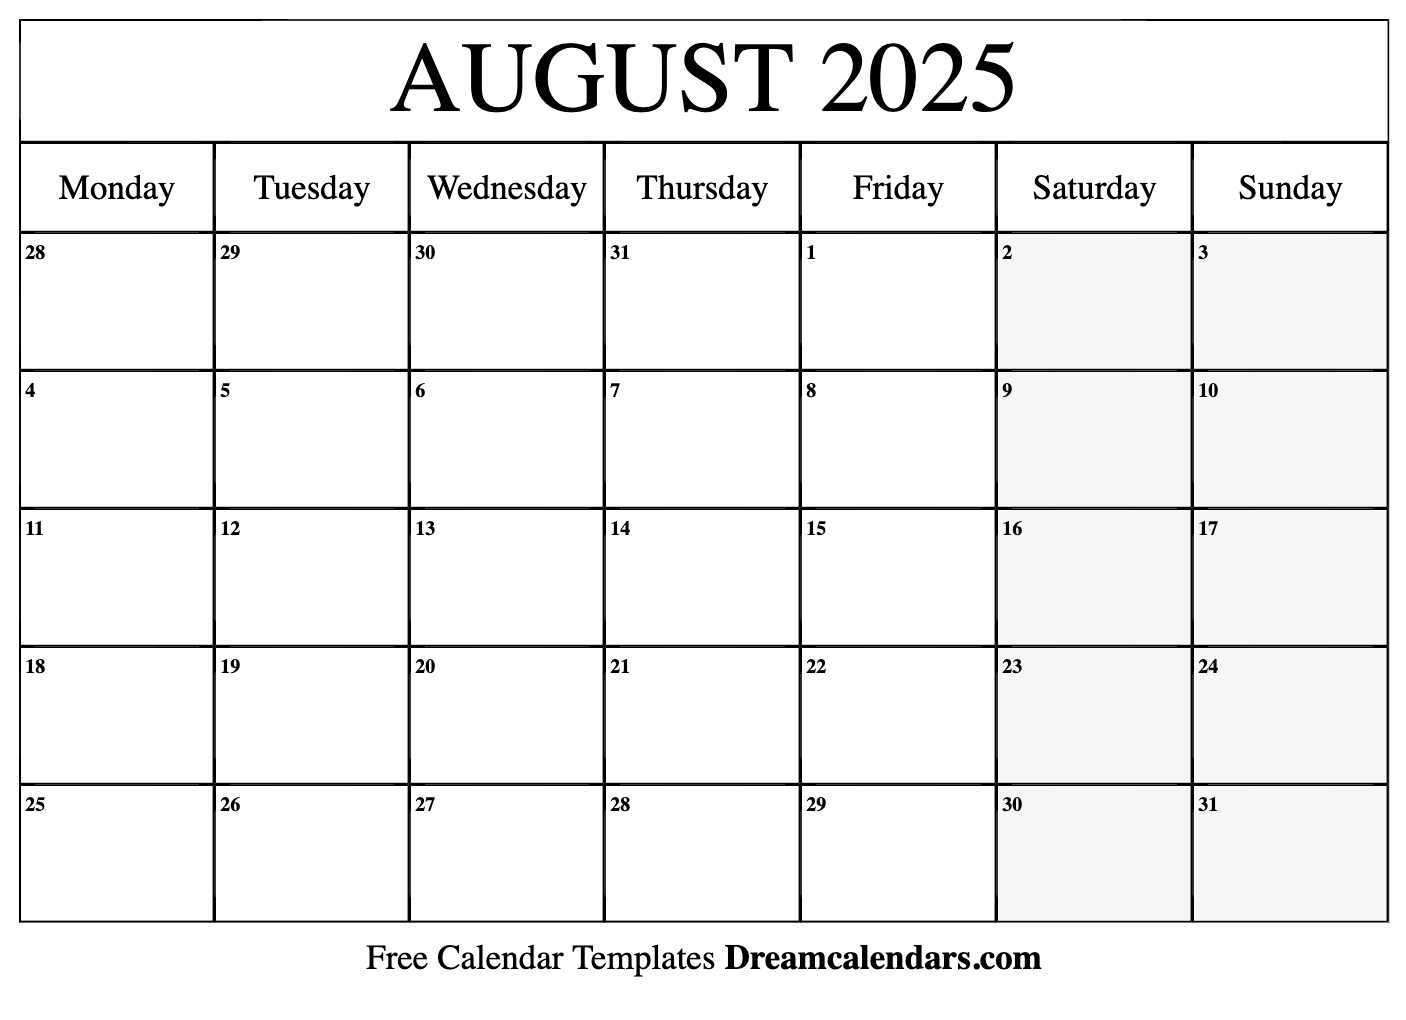 August 2025 Calendar Free Blank Printable With Holidays